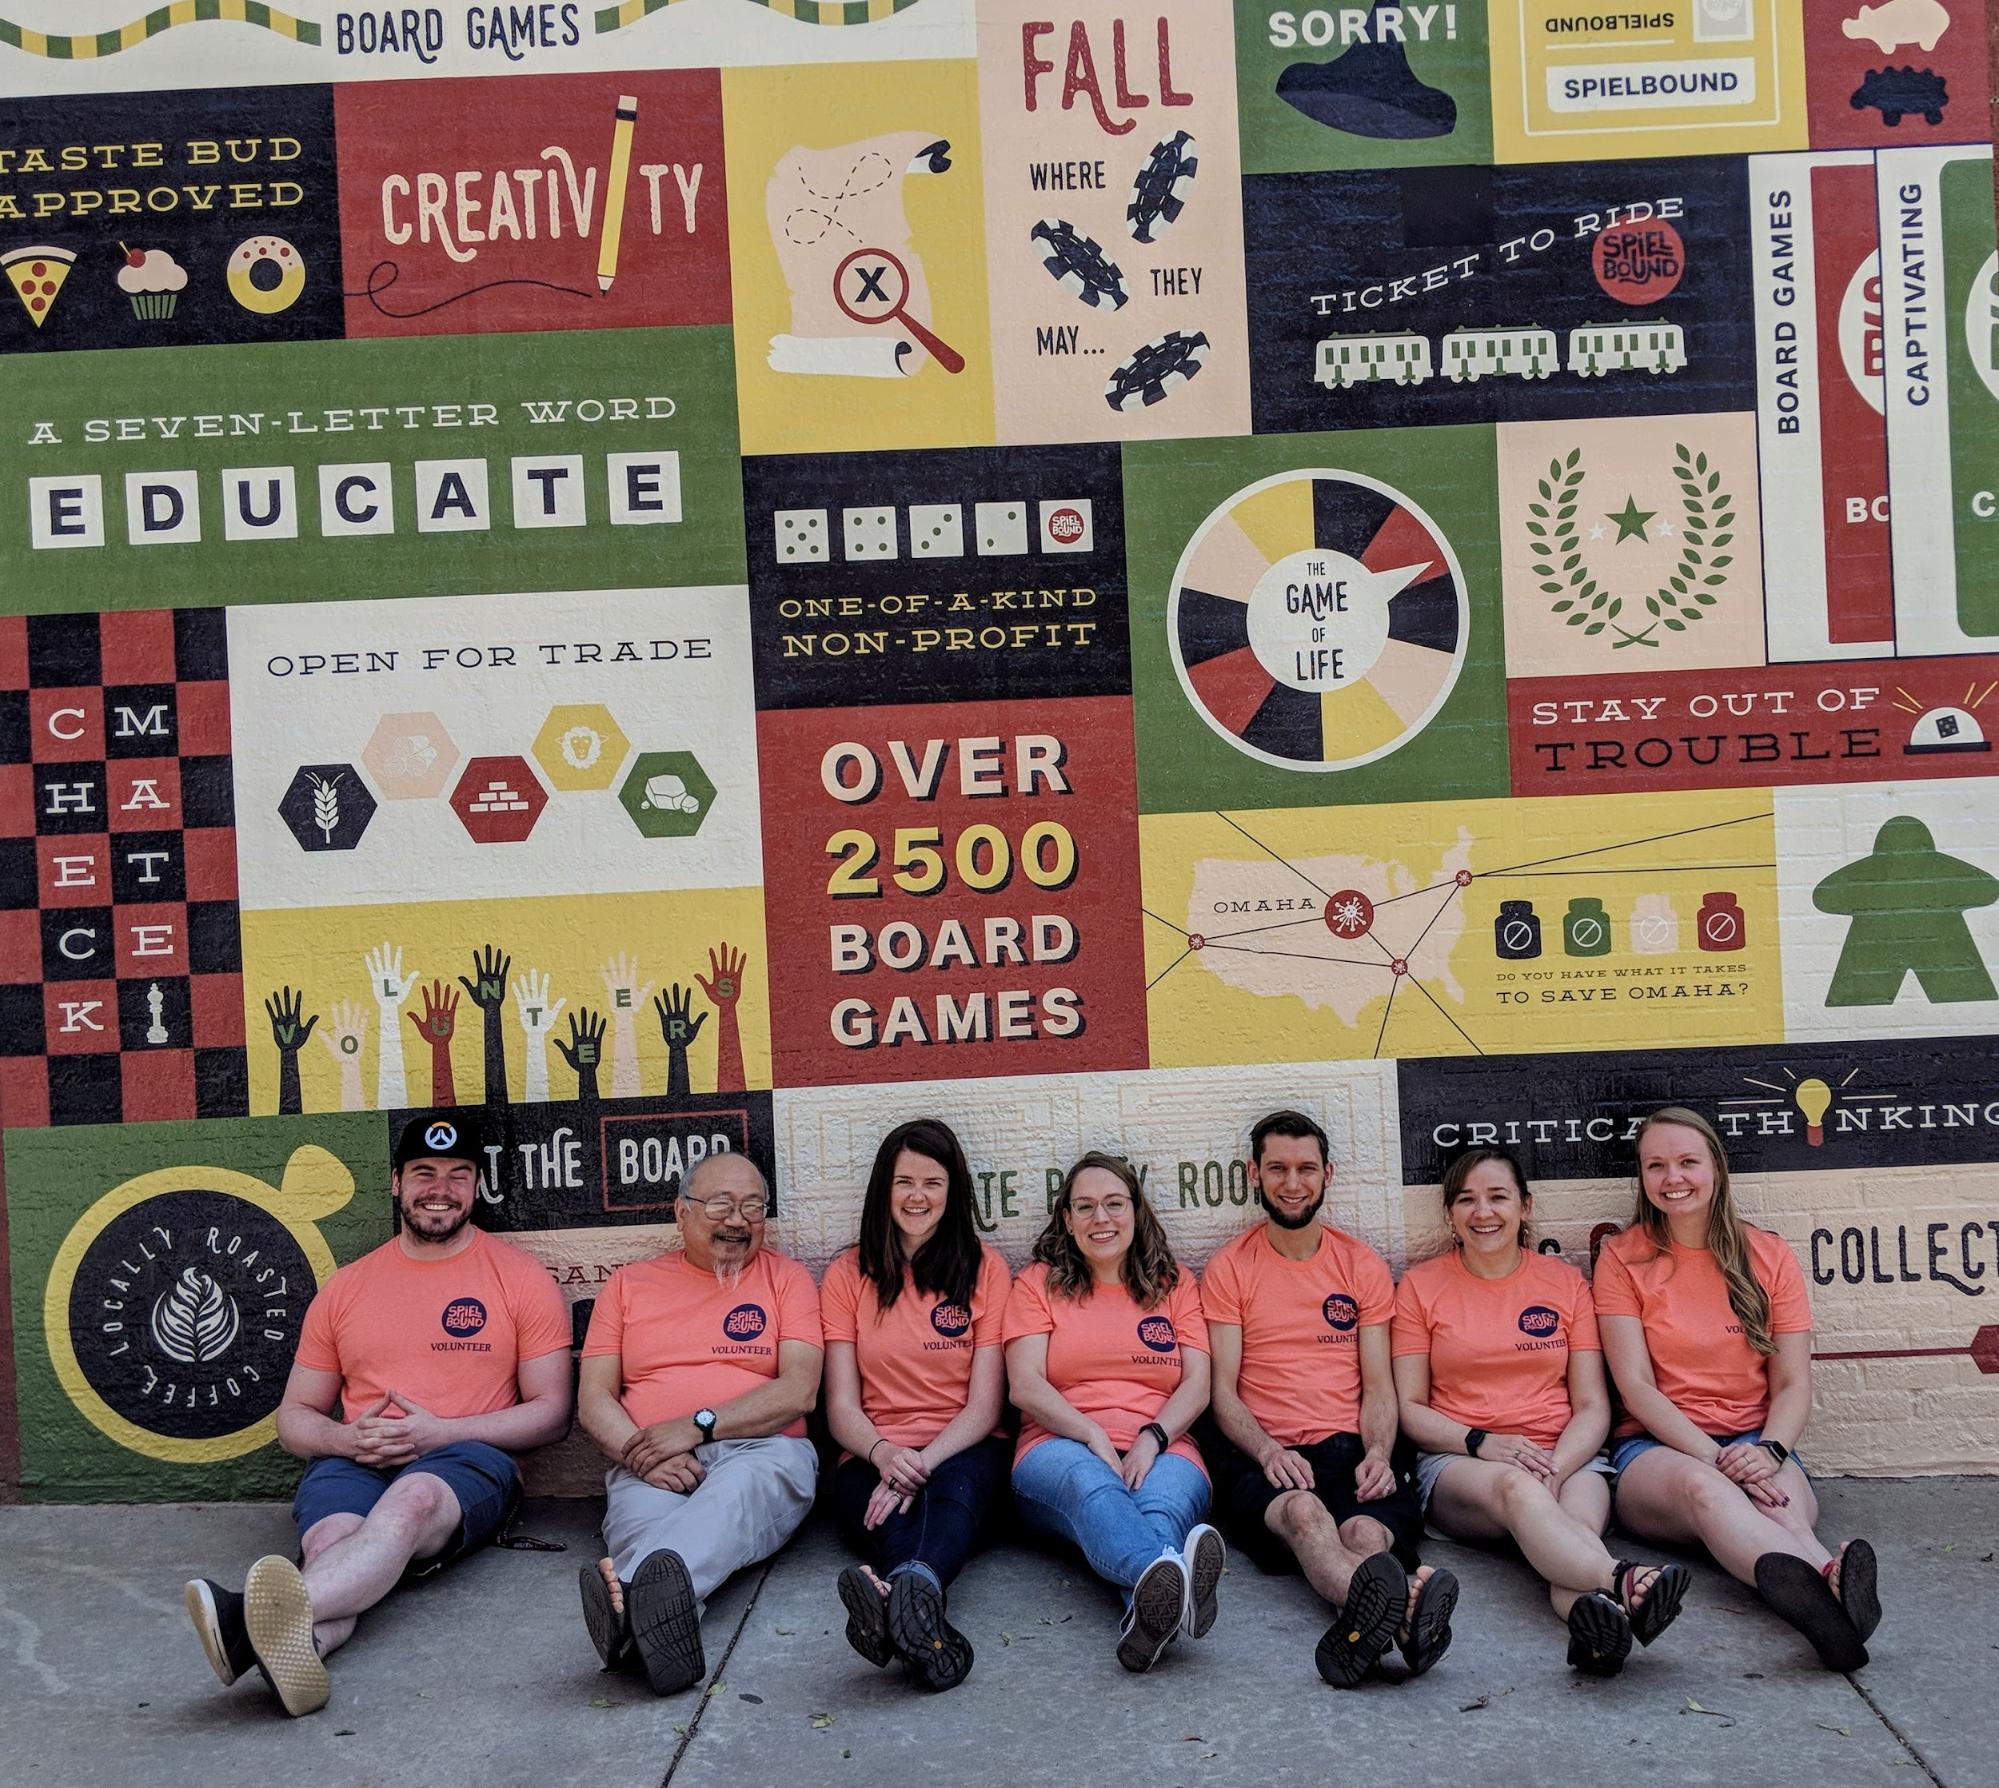 Stay Sharp crew in front of the Spielbound mural.